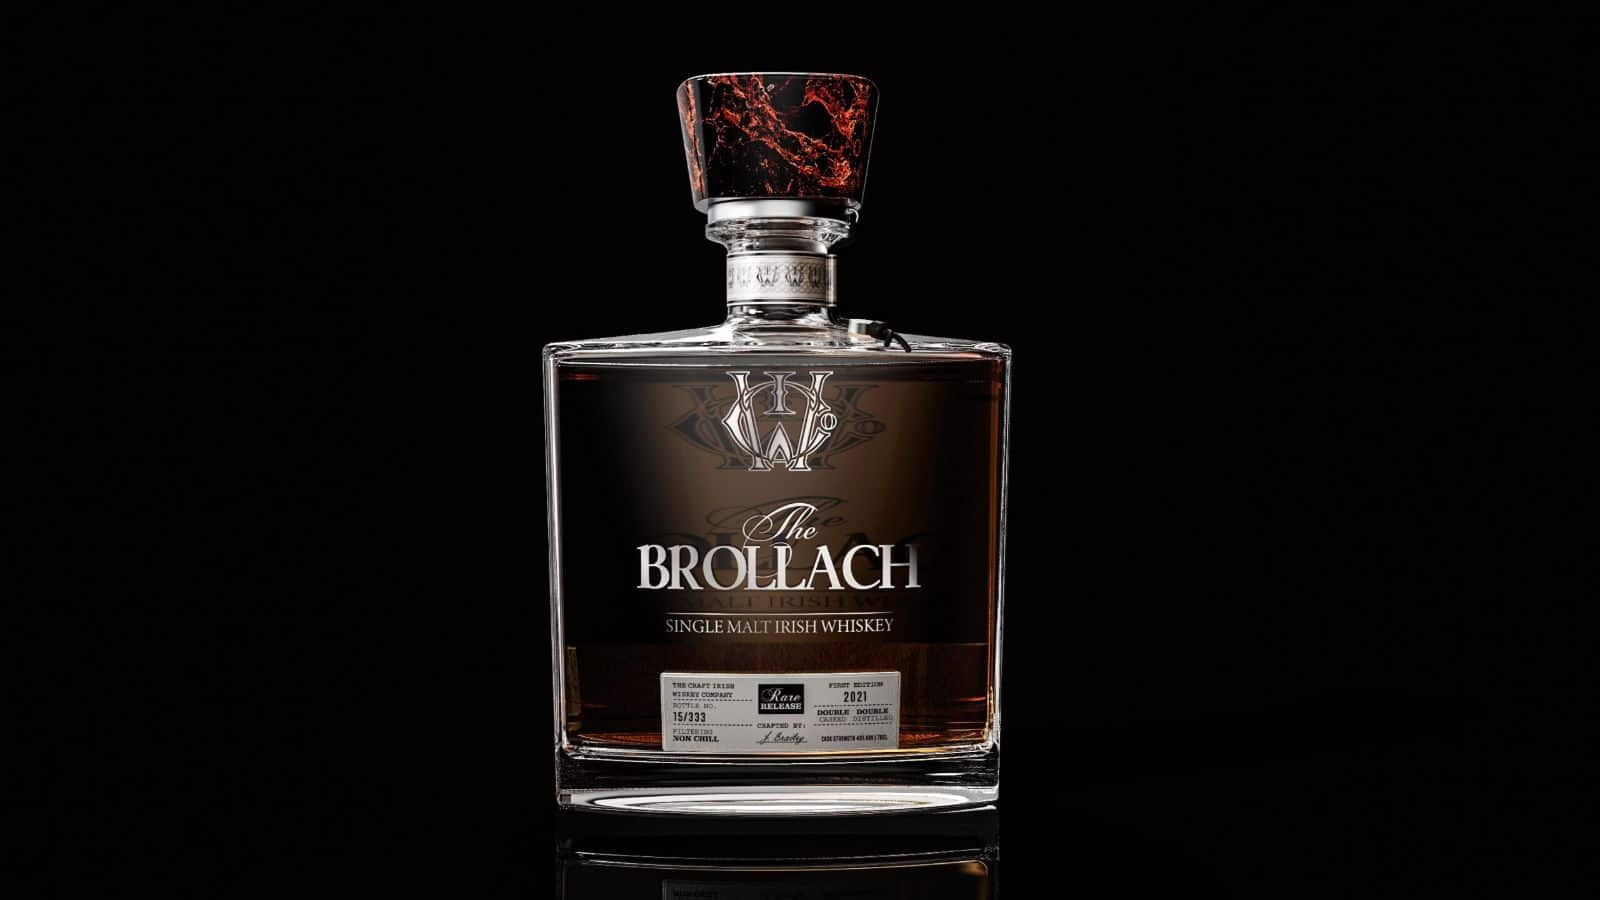 A bottle of award winning whiskey The Brollach